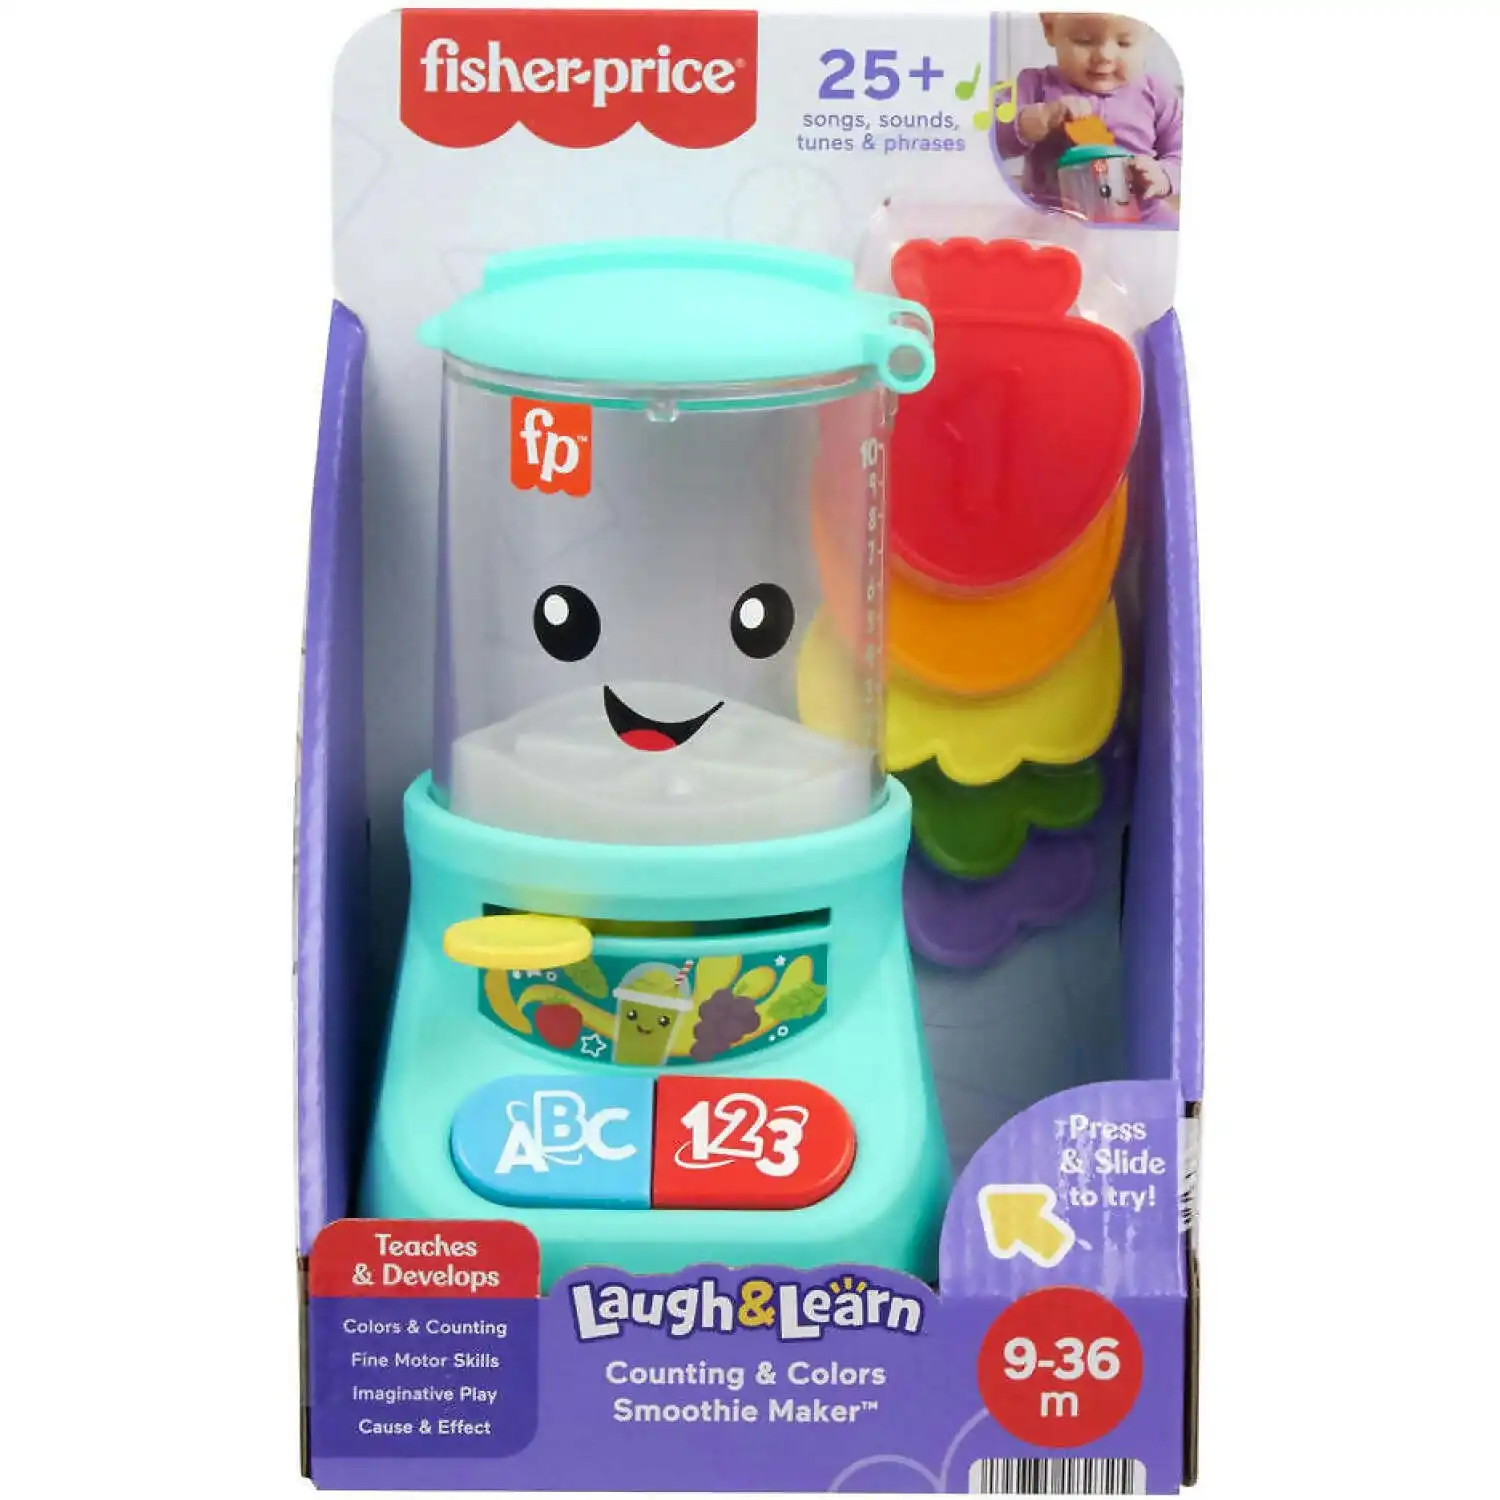 Fisher-price - Laugh & Learn Counting & Colors Smoothie Maker